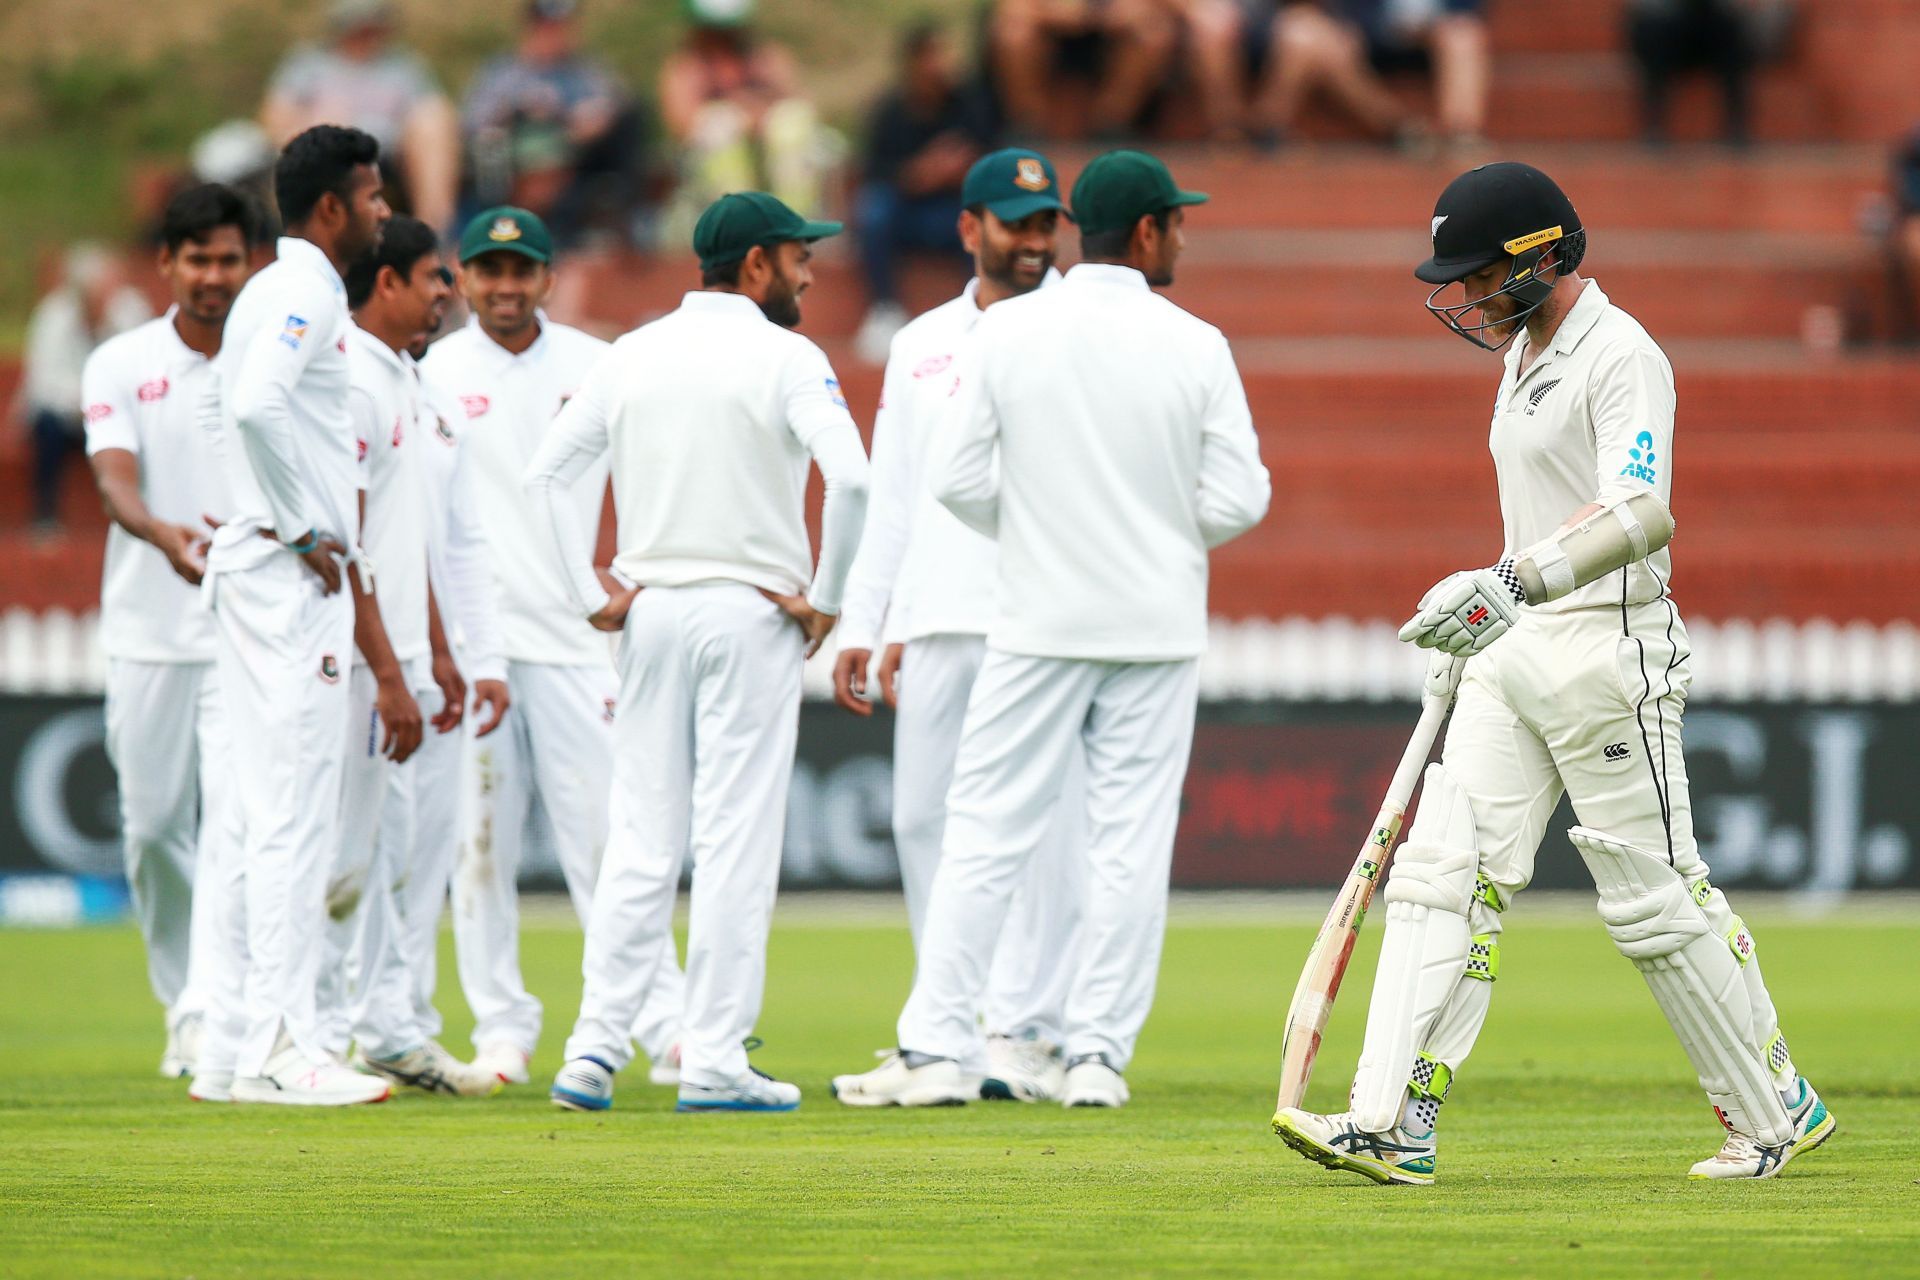 Bangladesh are set to play New Zealand in a two-test series beginning January 1, 2022.